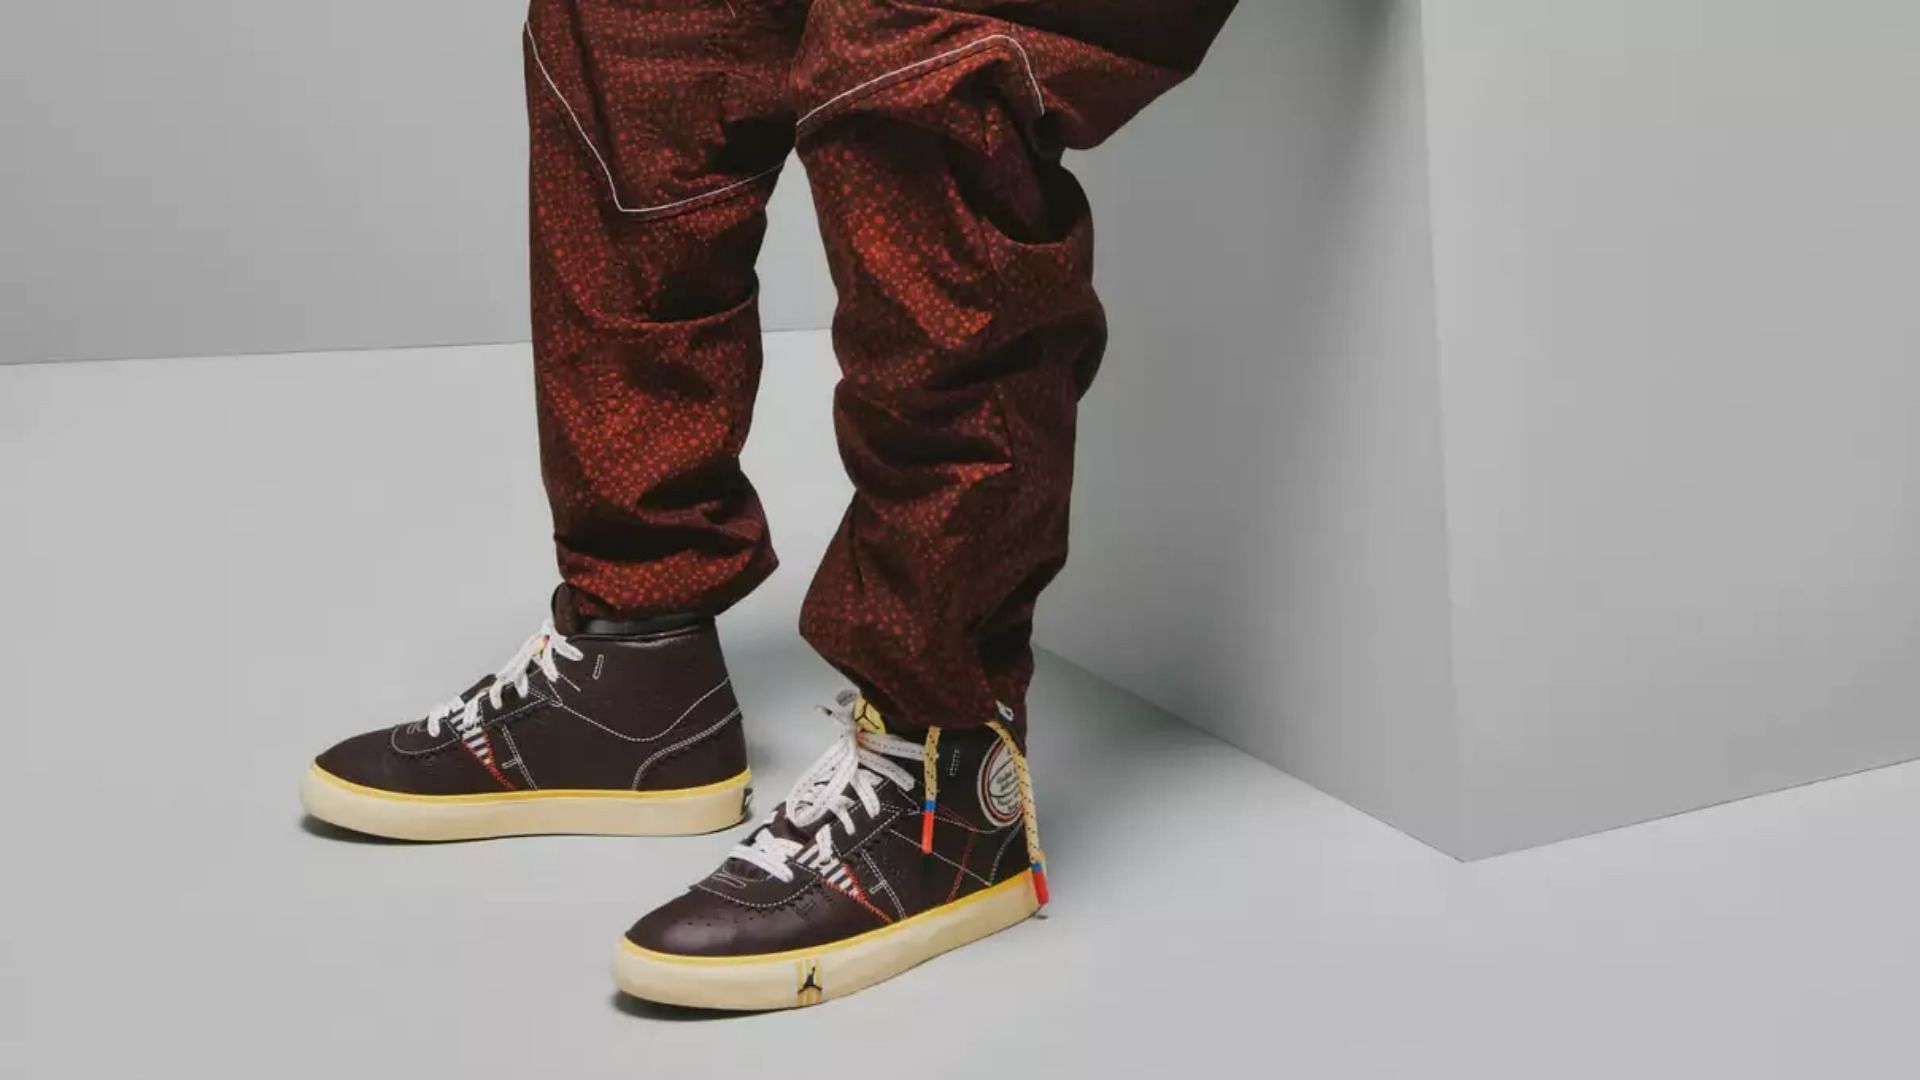 Where to buy the Maison Chateau Rouge x Nike's Jordan collection? Price ...